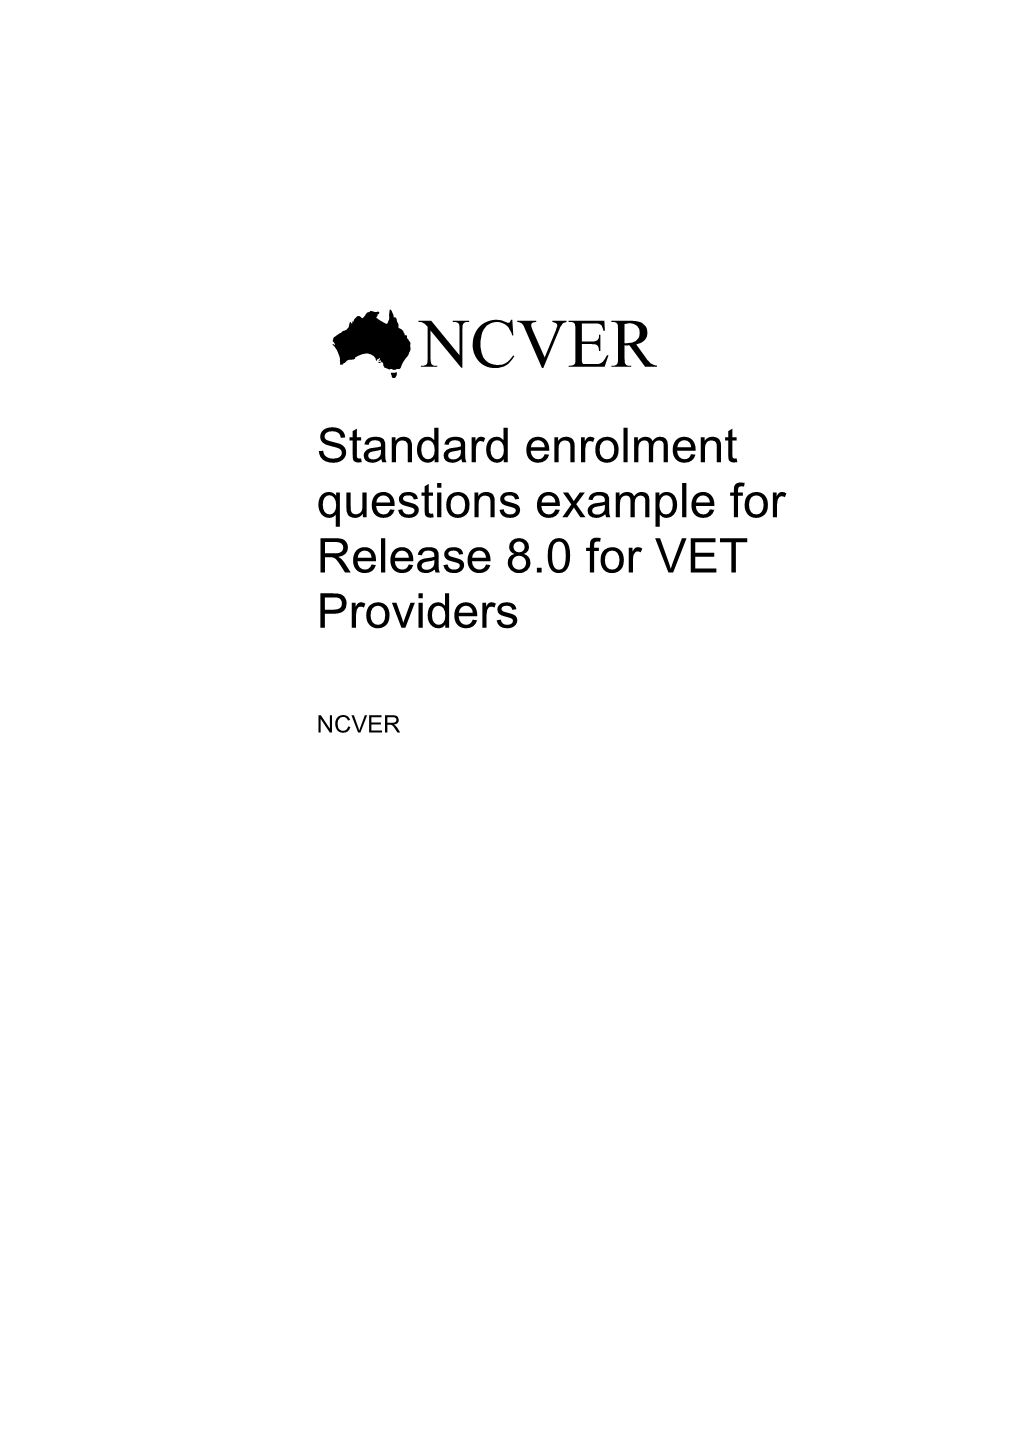 Standard Enrolment Questions Example for Release 8.0 for VET Providers